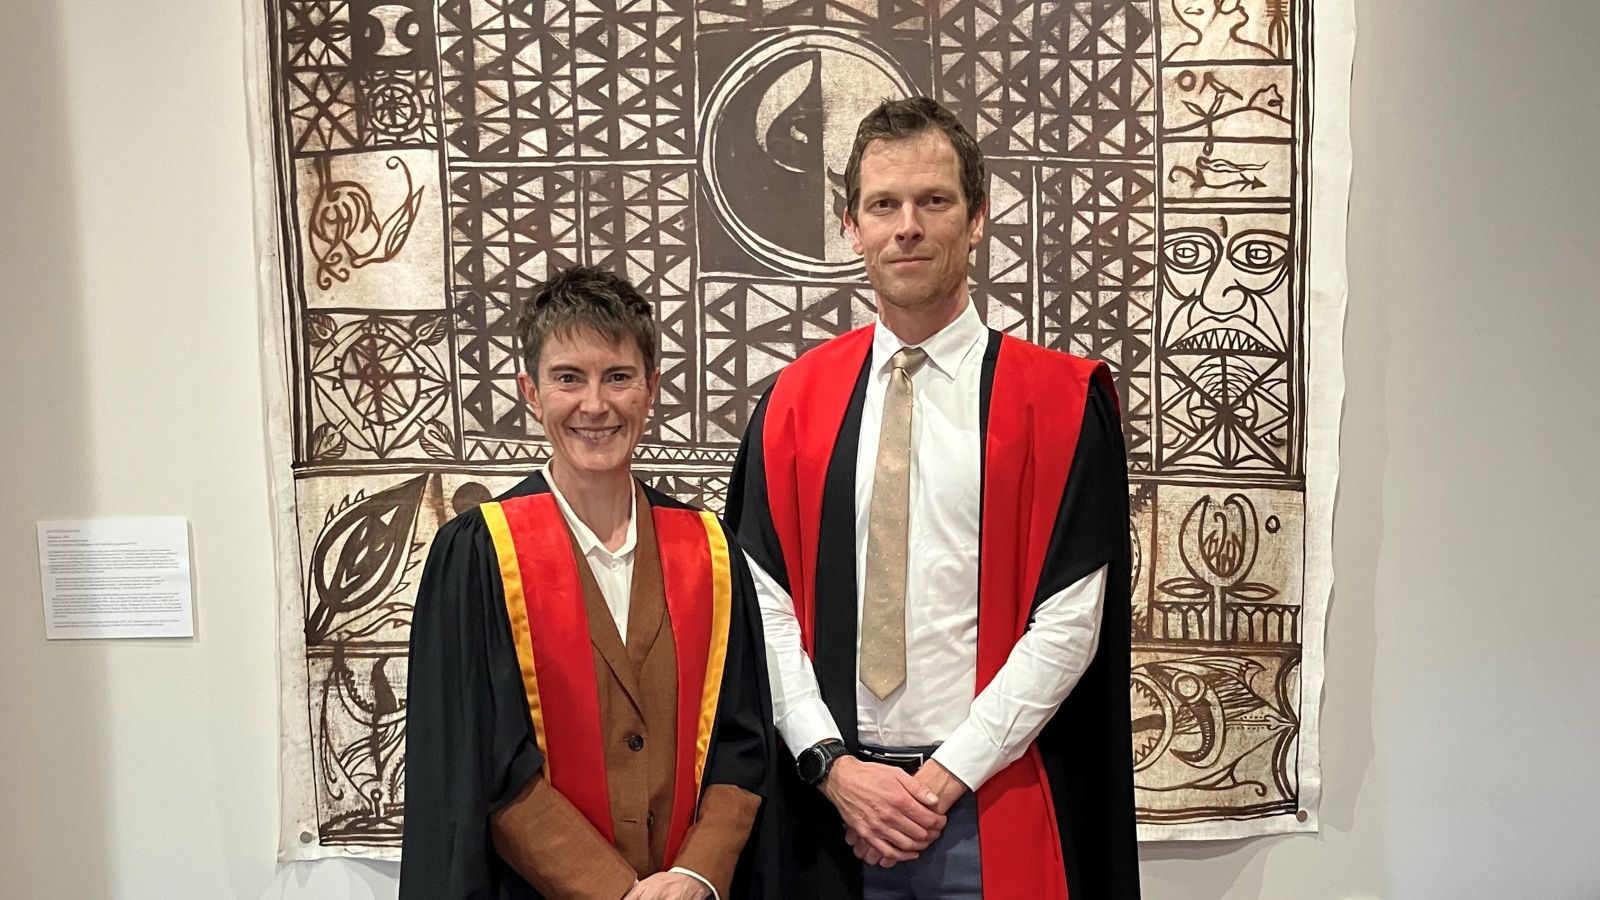 Two professionally dressed academics with gowns standing in front of a piece of artwork.